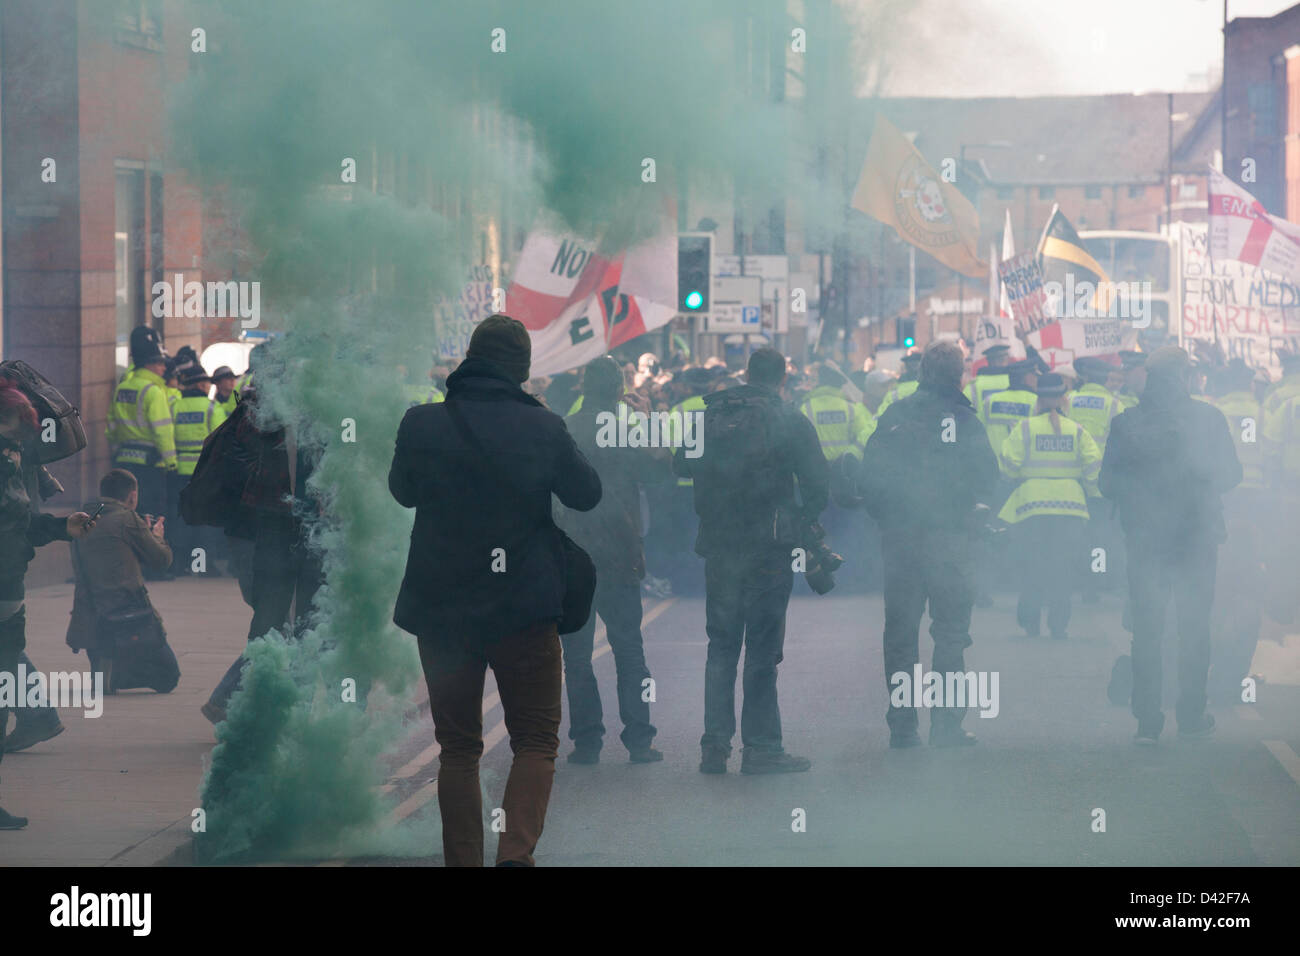 Manchester, UK. 2nd March 2013. Members of the far-right English Defence League (EDL) clash with police during a protest in Manchester. Approximately 300 members of the 'Islamophobic' group attended.The EDL march was under strict police supervision while heading to Albert Square. EDL members used green smoke bombs while chanting slogans. Credit: Lydia Pagoni/Alamy Live News Stock Photo